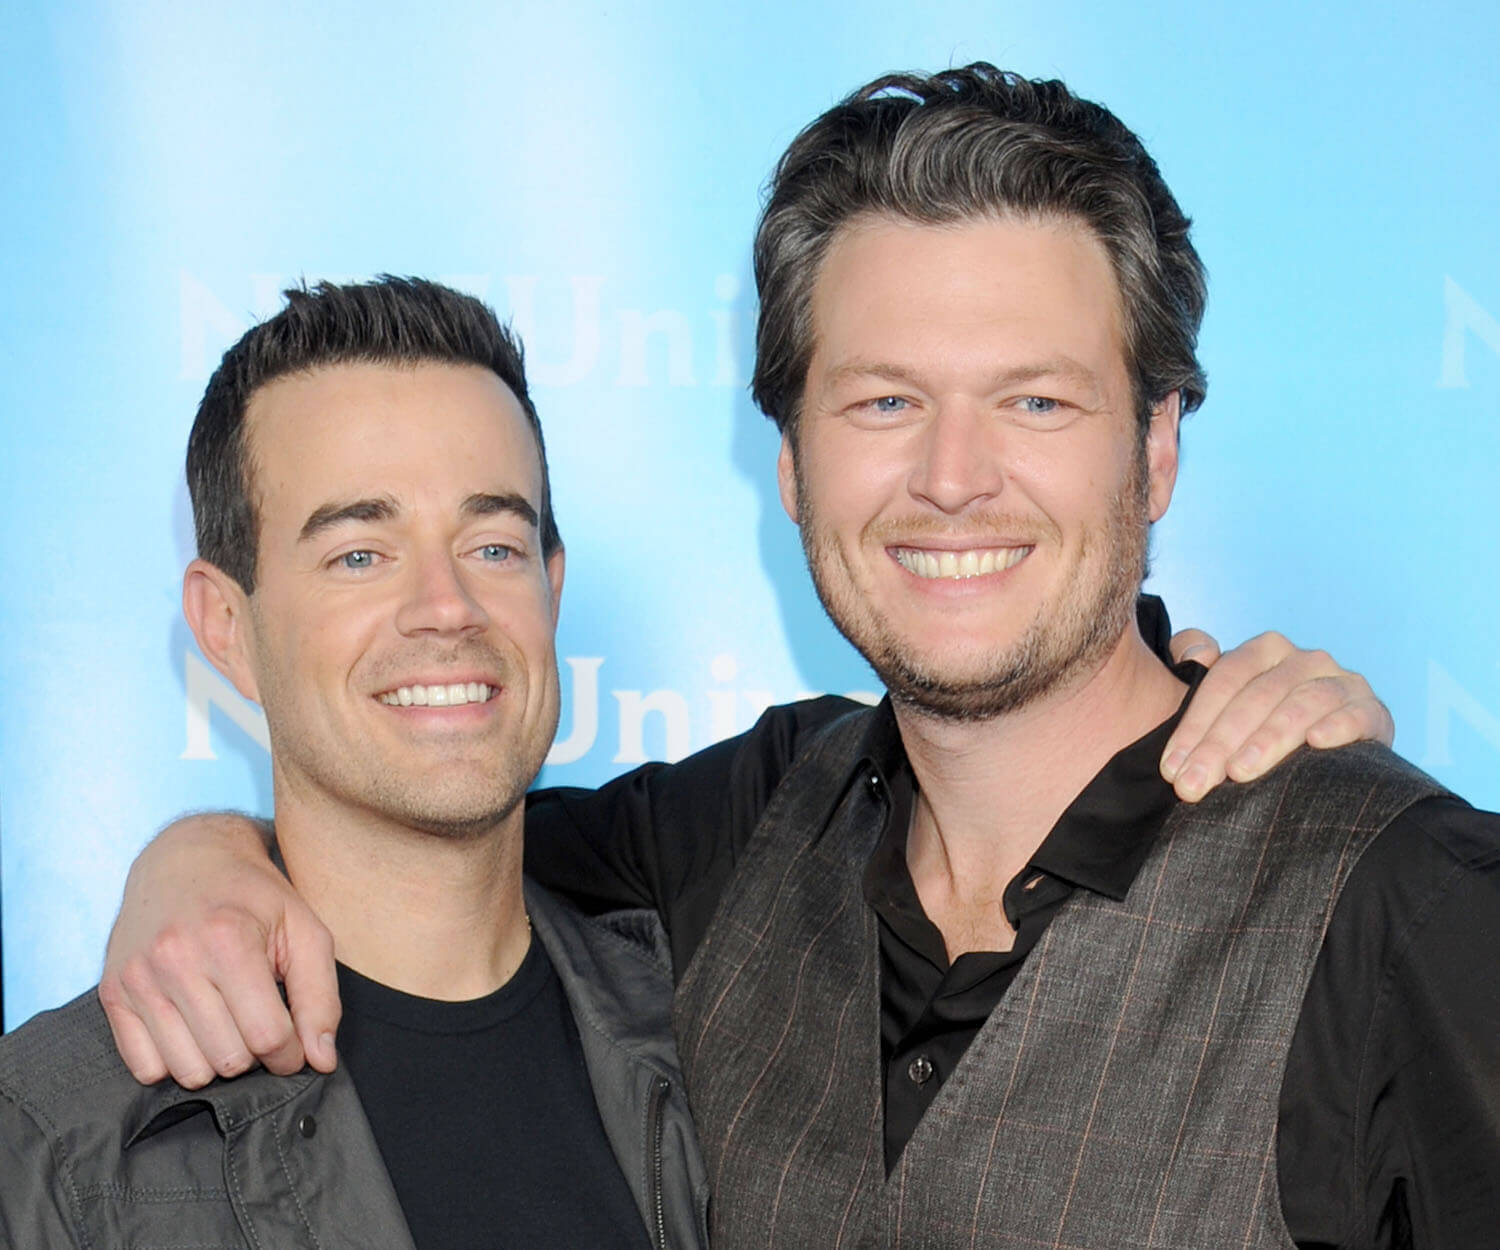 'The Voice' host Carson Daly smiling with Blake Shelton